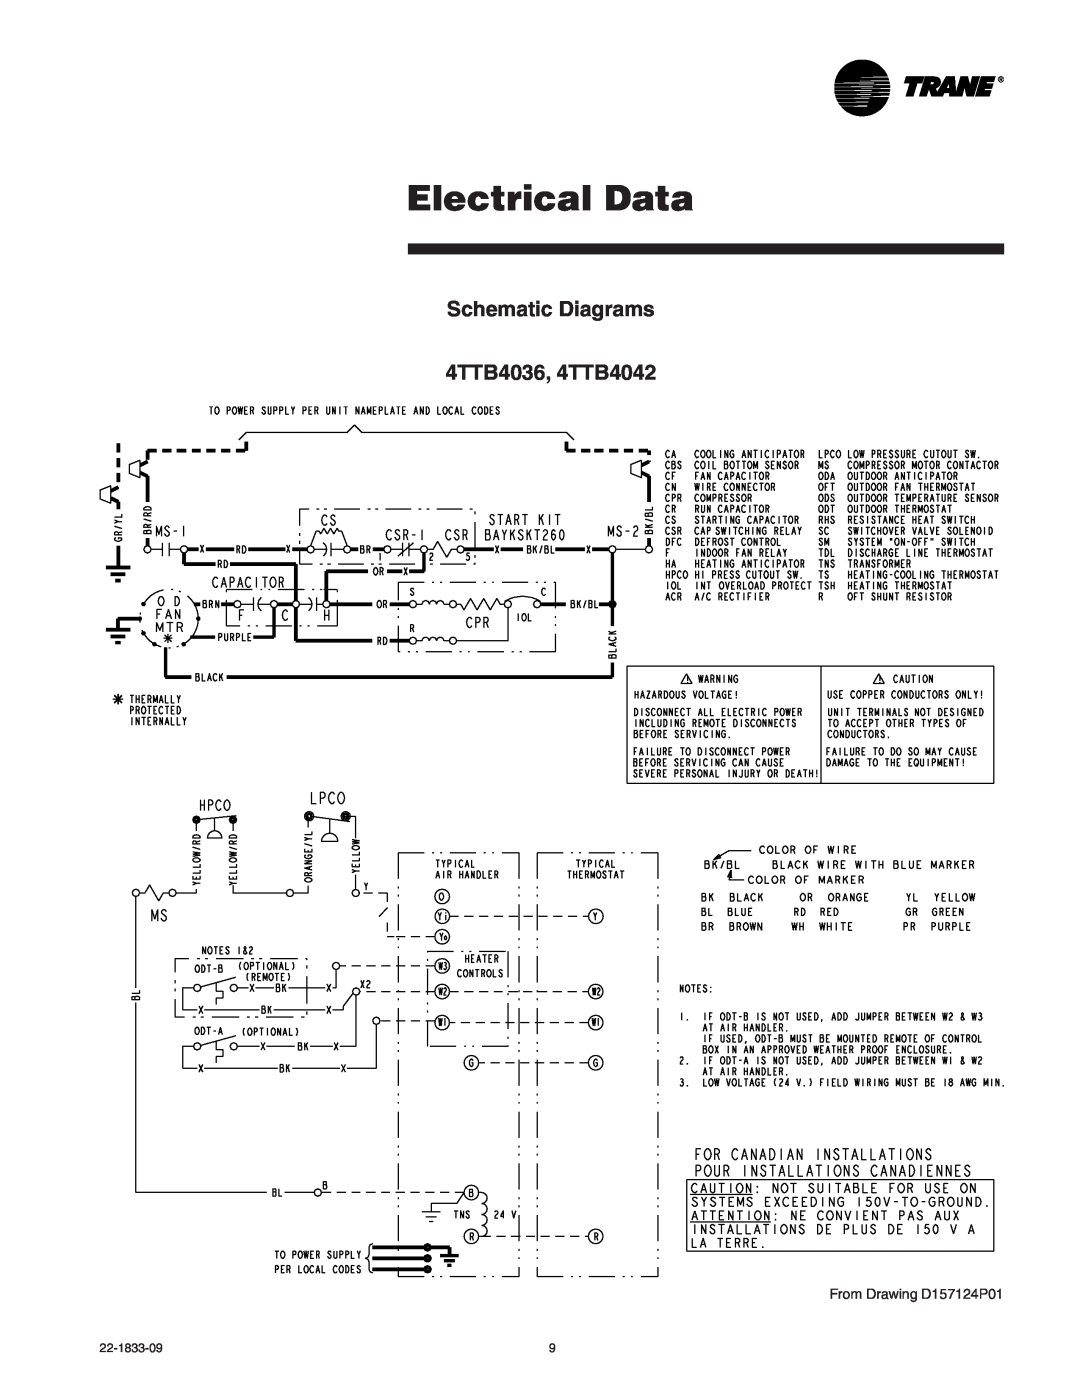 Trane manual Electrical Data, Schematic Diagrams 4TTB4036, 4TTB4042, From Drawing D157124P01 